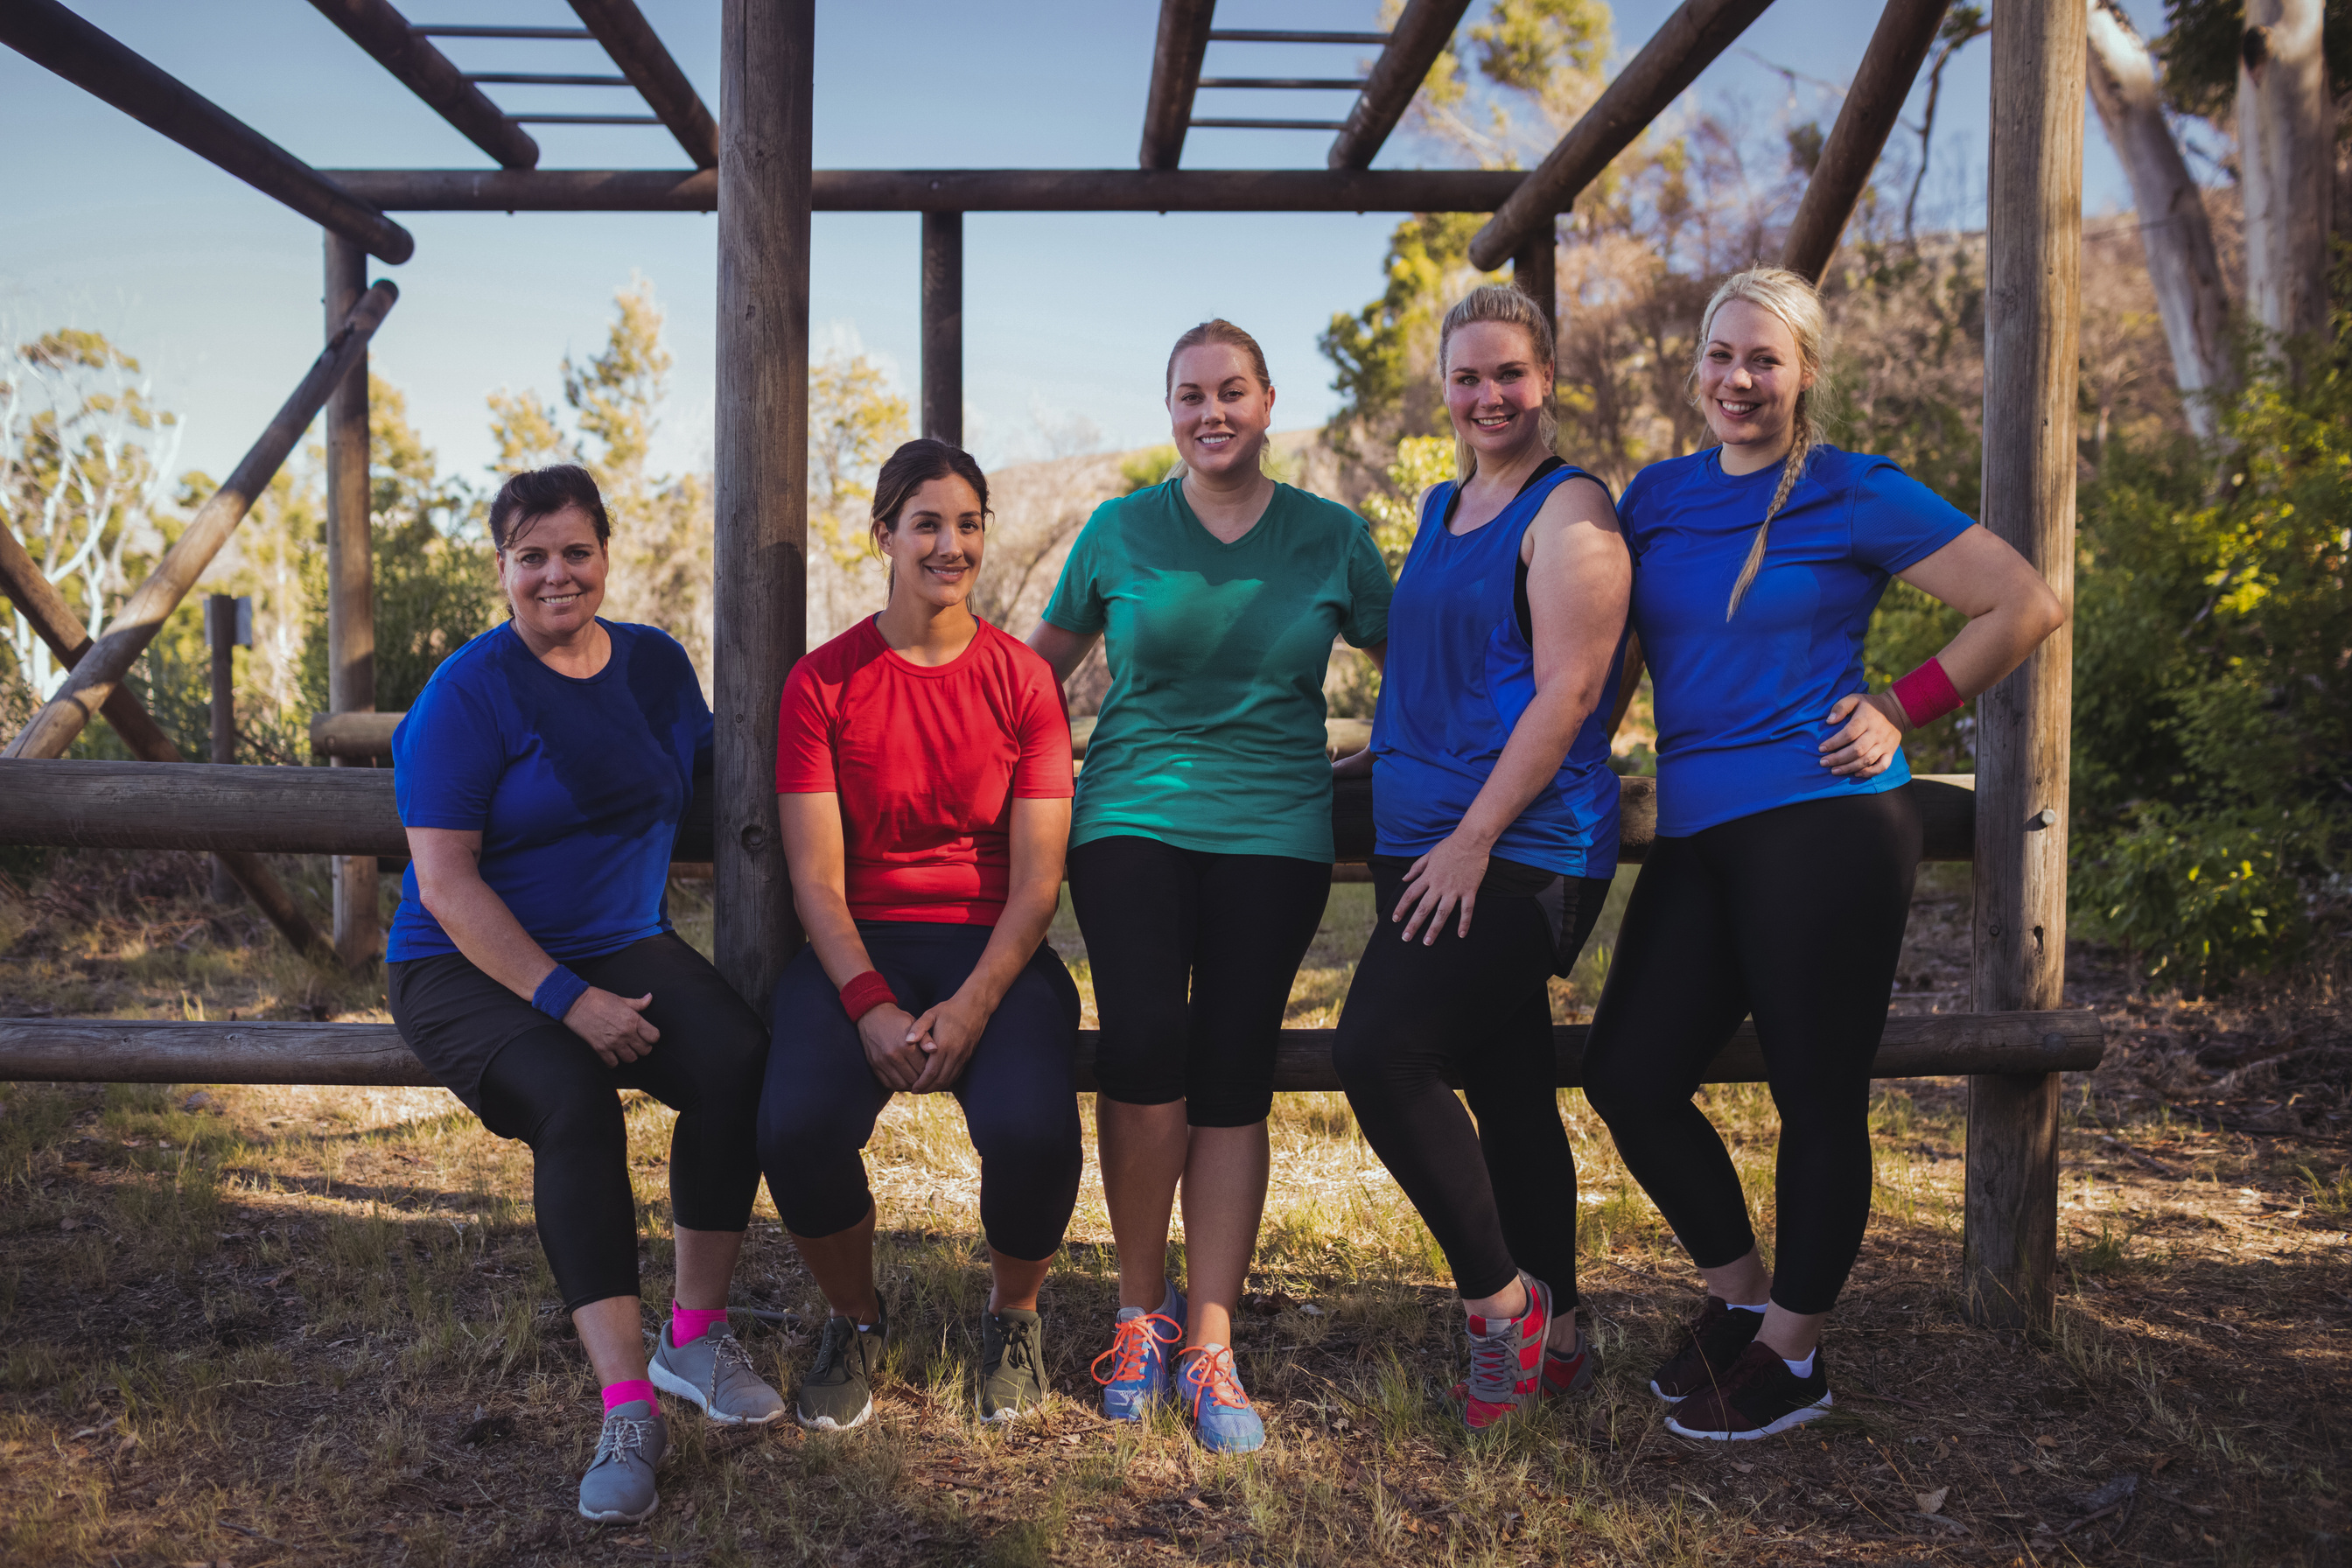 Group of fit women standing together in the boot camp